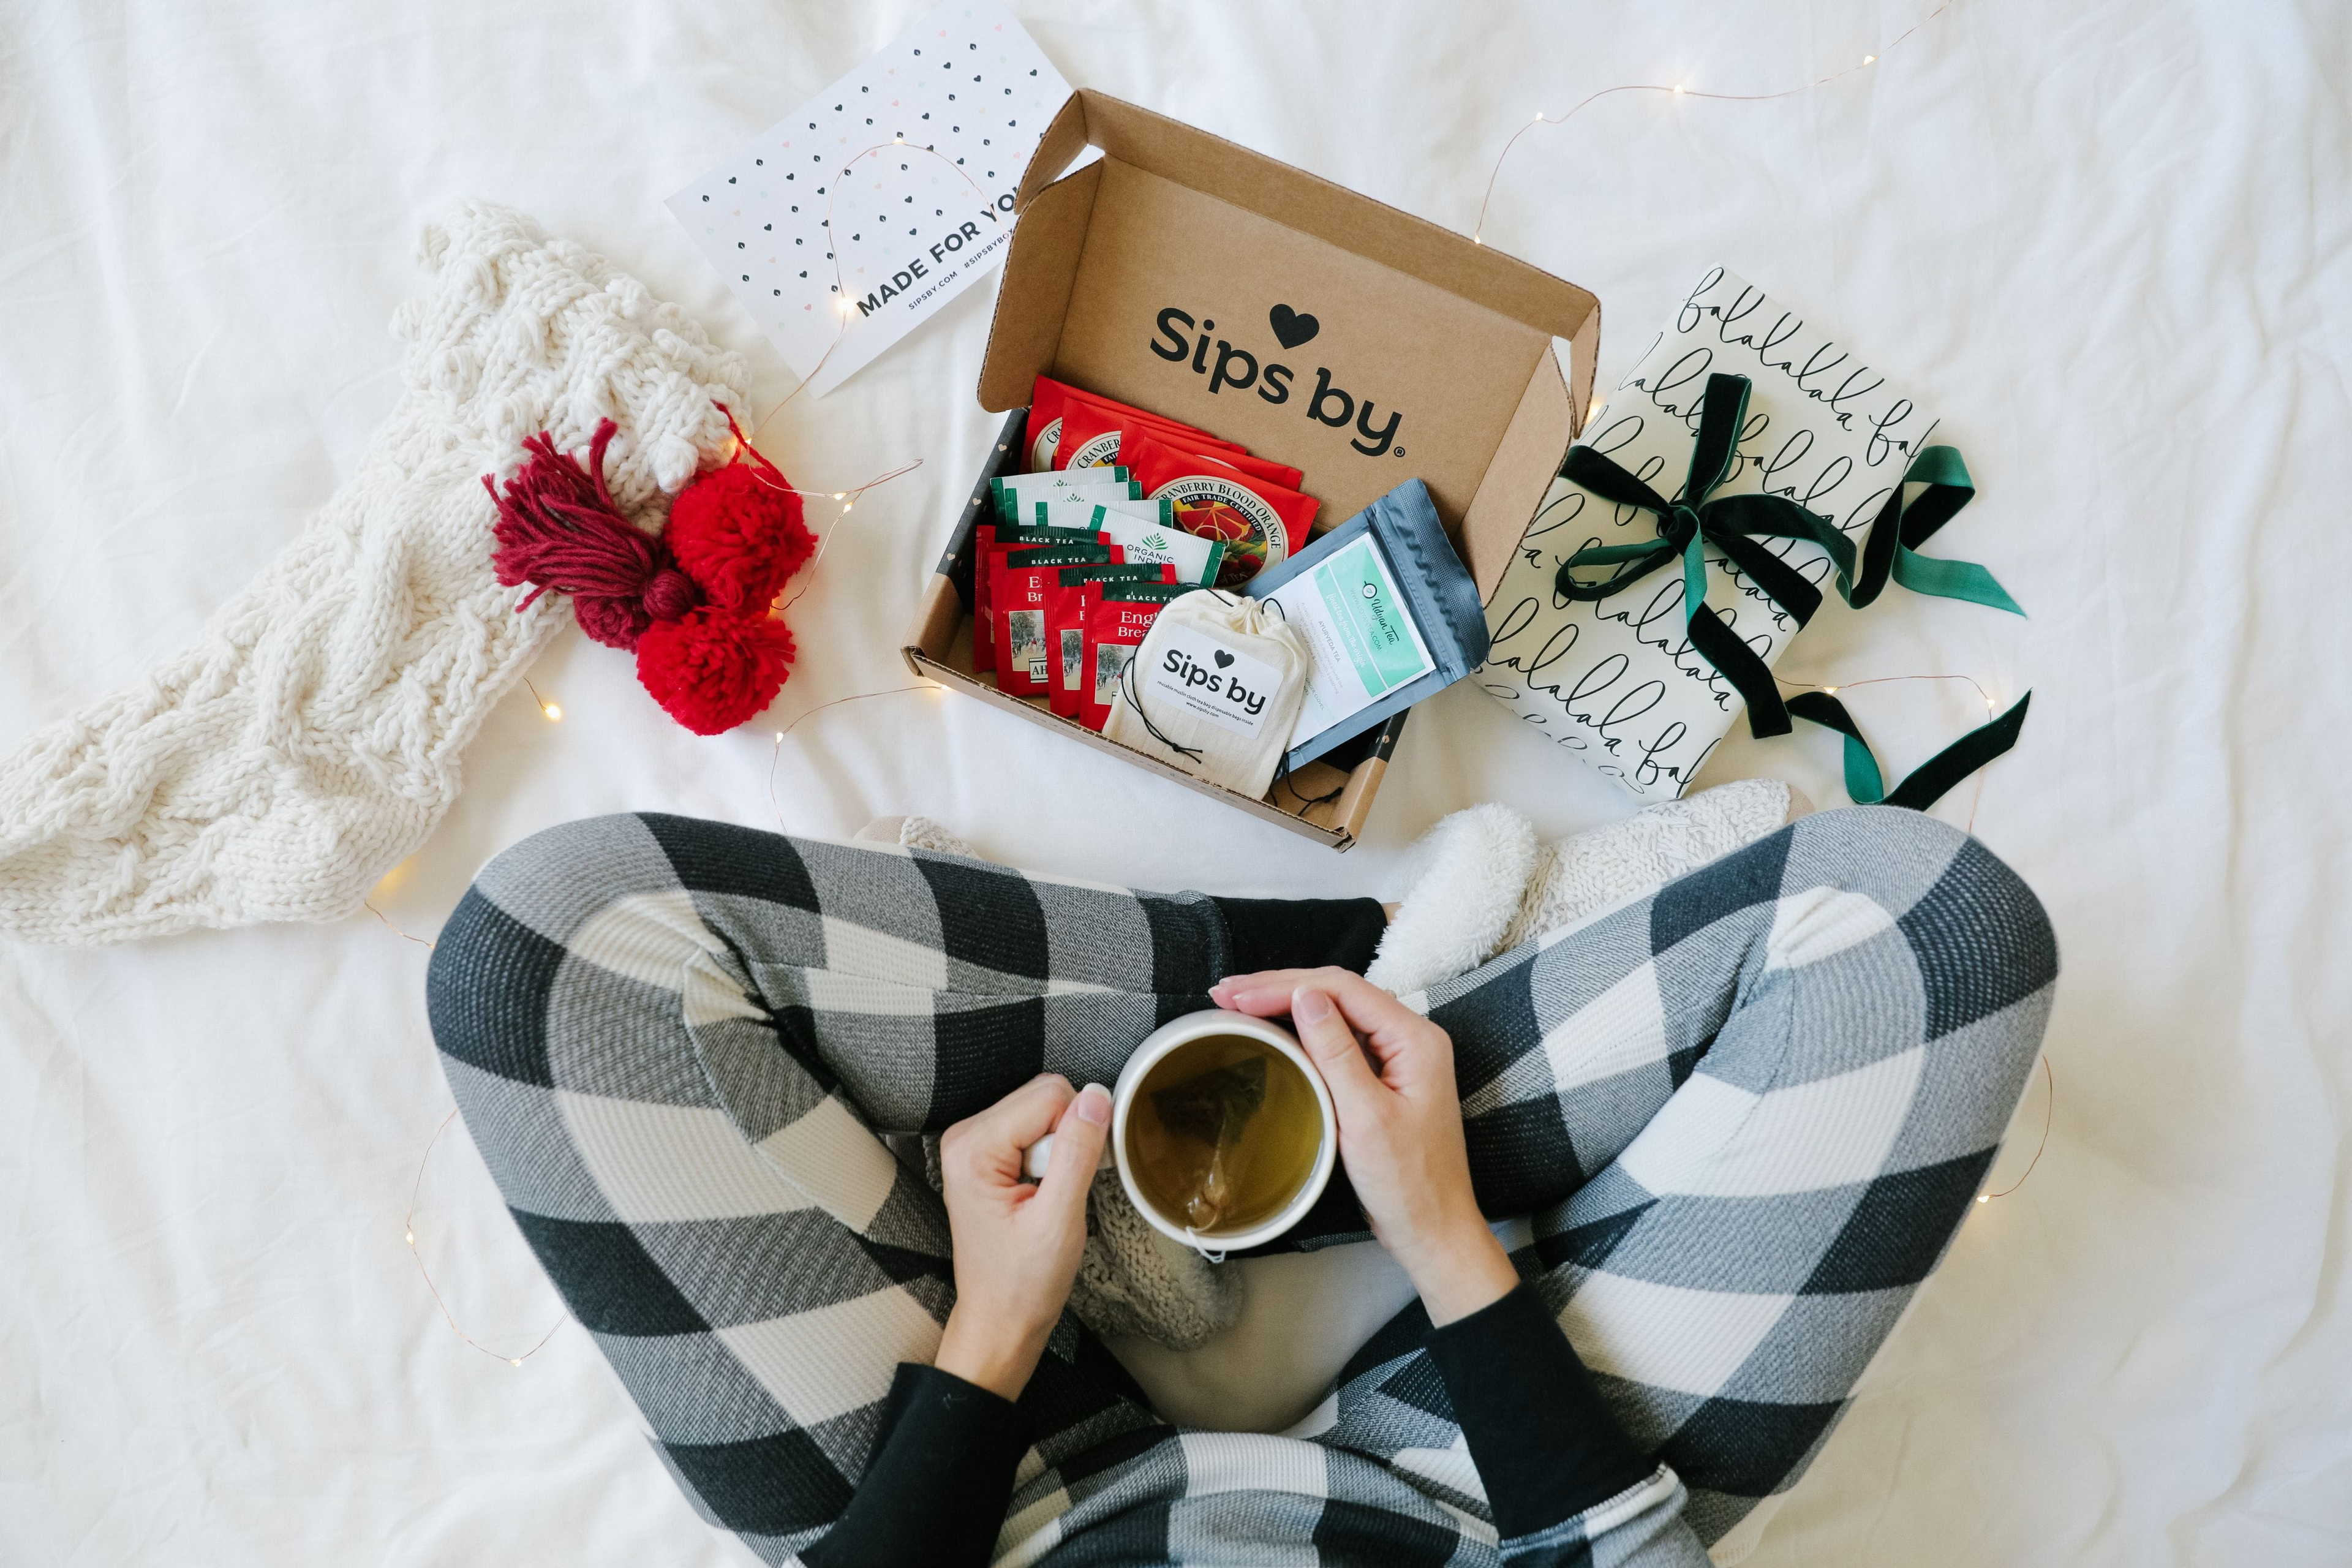 Scene of person wearing black and white flannel pajama pants, holding a mug of tea, with an open Sips by box and stocking and gifts on the floor